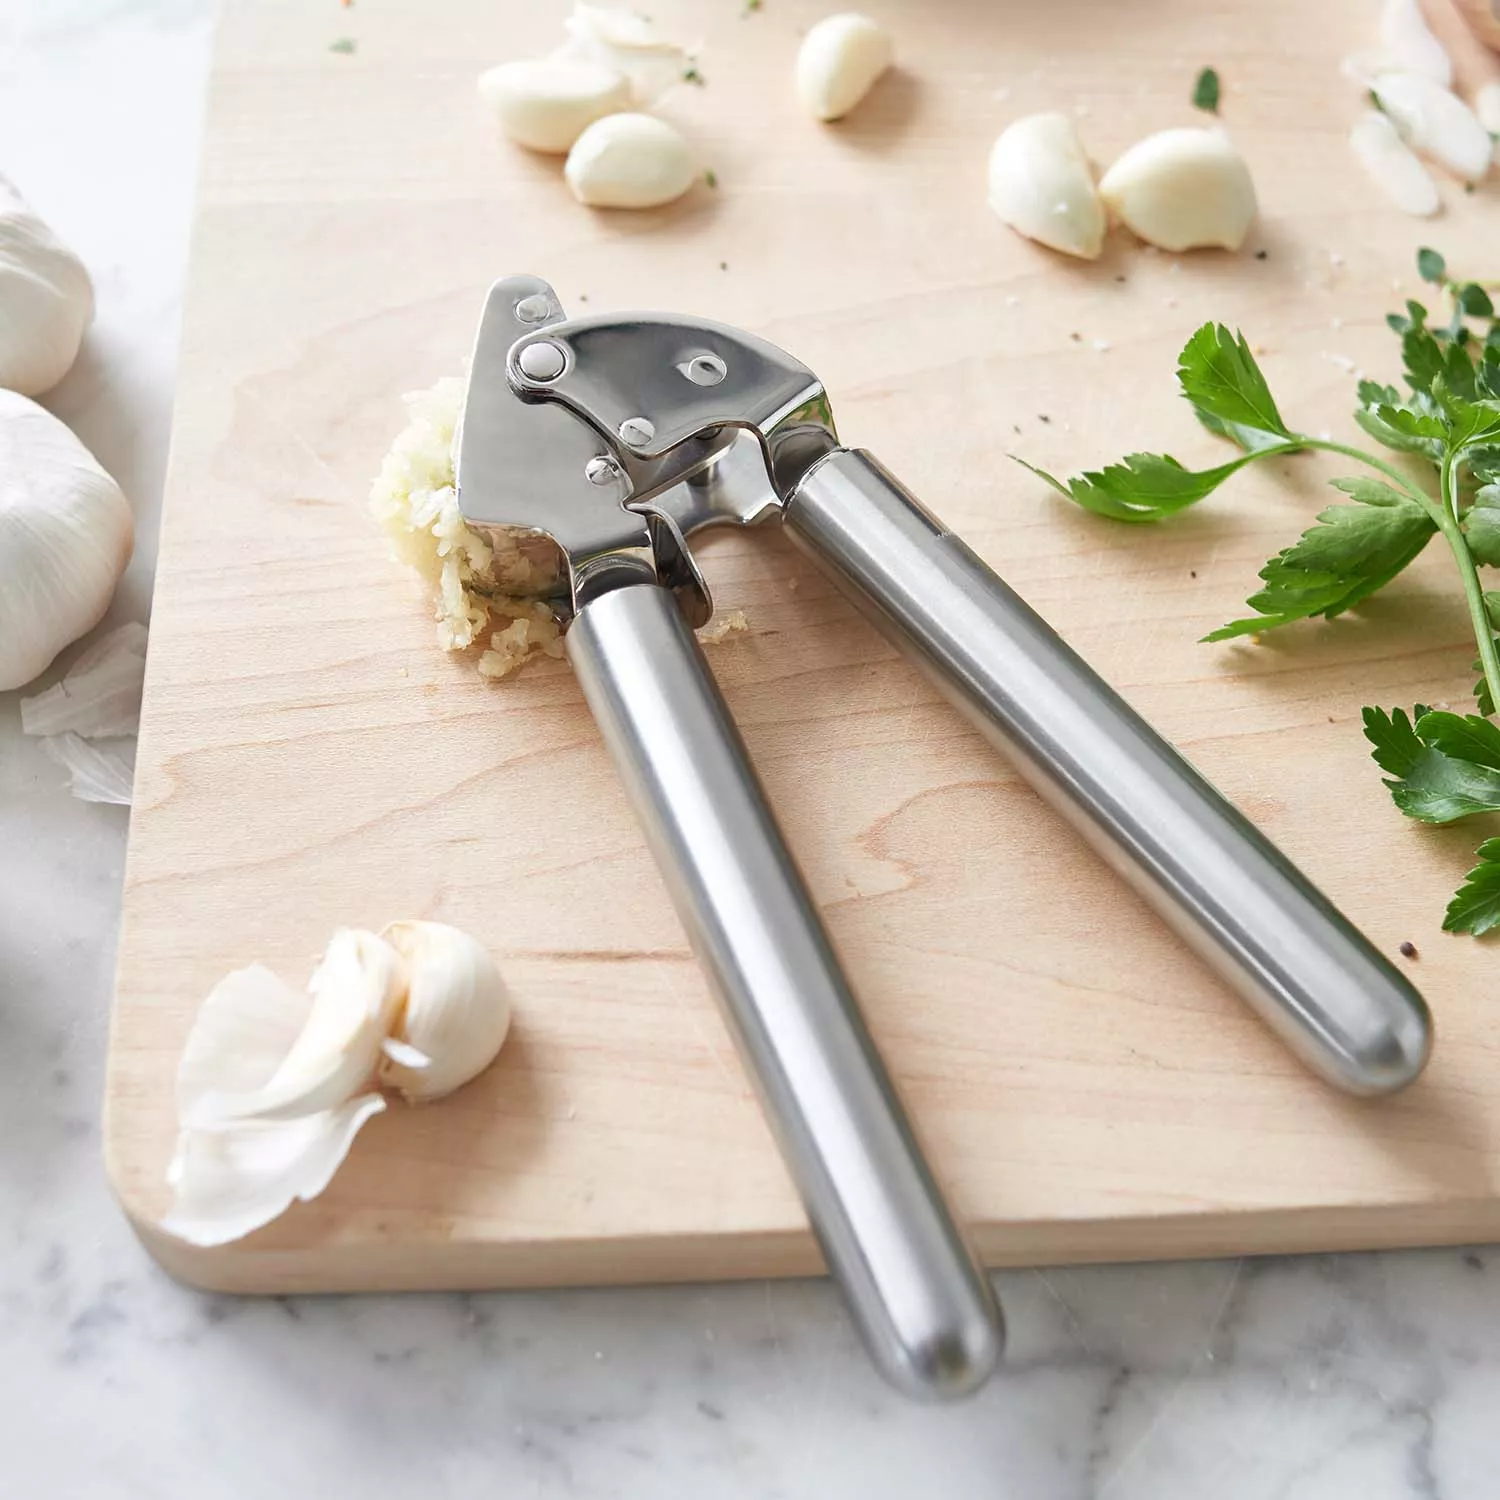 Zyliss Easy Clean Garlic Press - Lightweight, Easy-to-Use Garlic Mincer &  Crusher for Food Prep & Kitchen Accessories